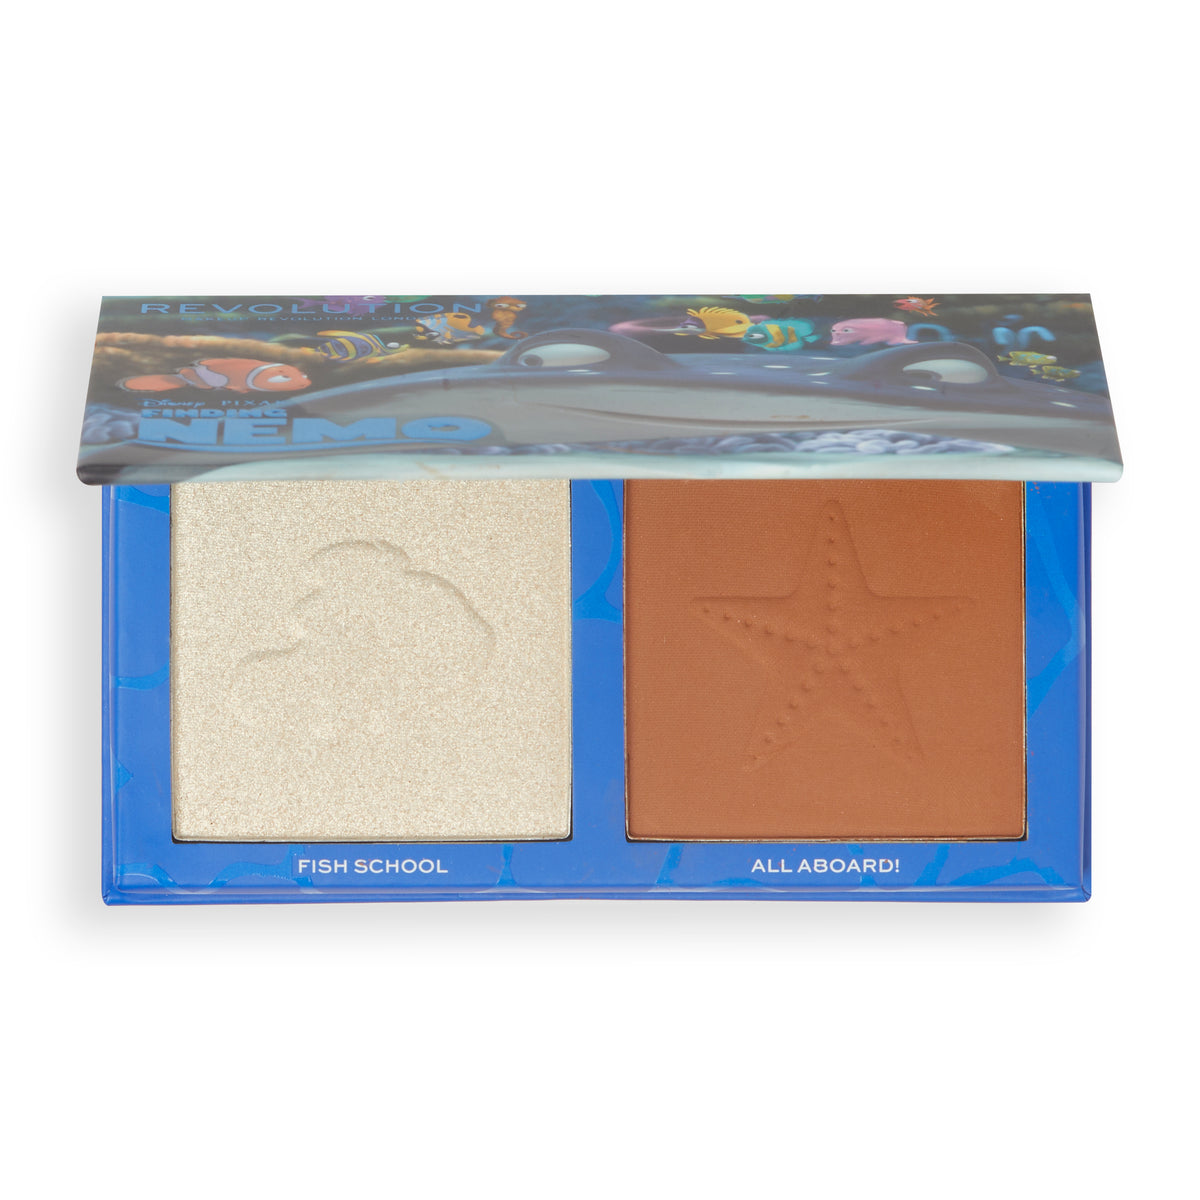 DISNEY & PIXAR’S FINDING NEMO AND WAKE UP BRONZER AND REVOLUTION HIGHLIGHTER PALETTE OUTLET